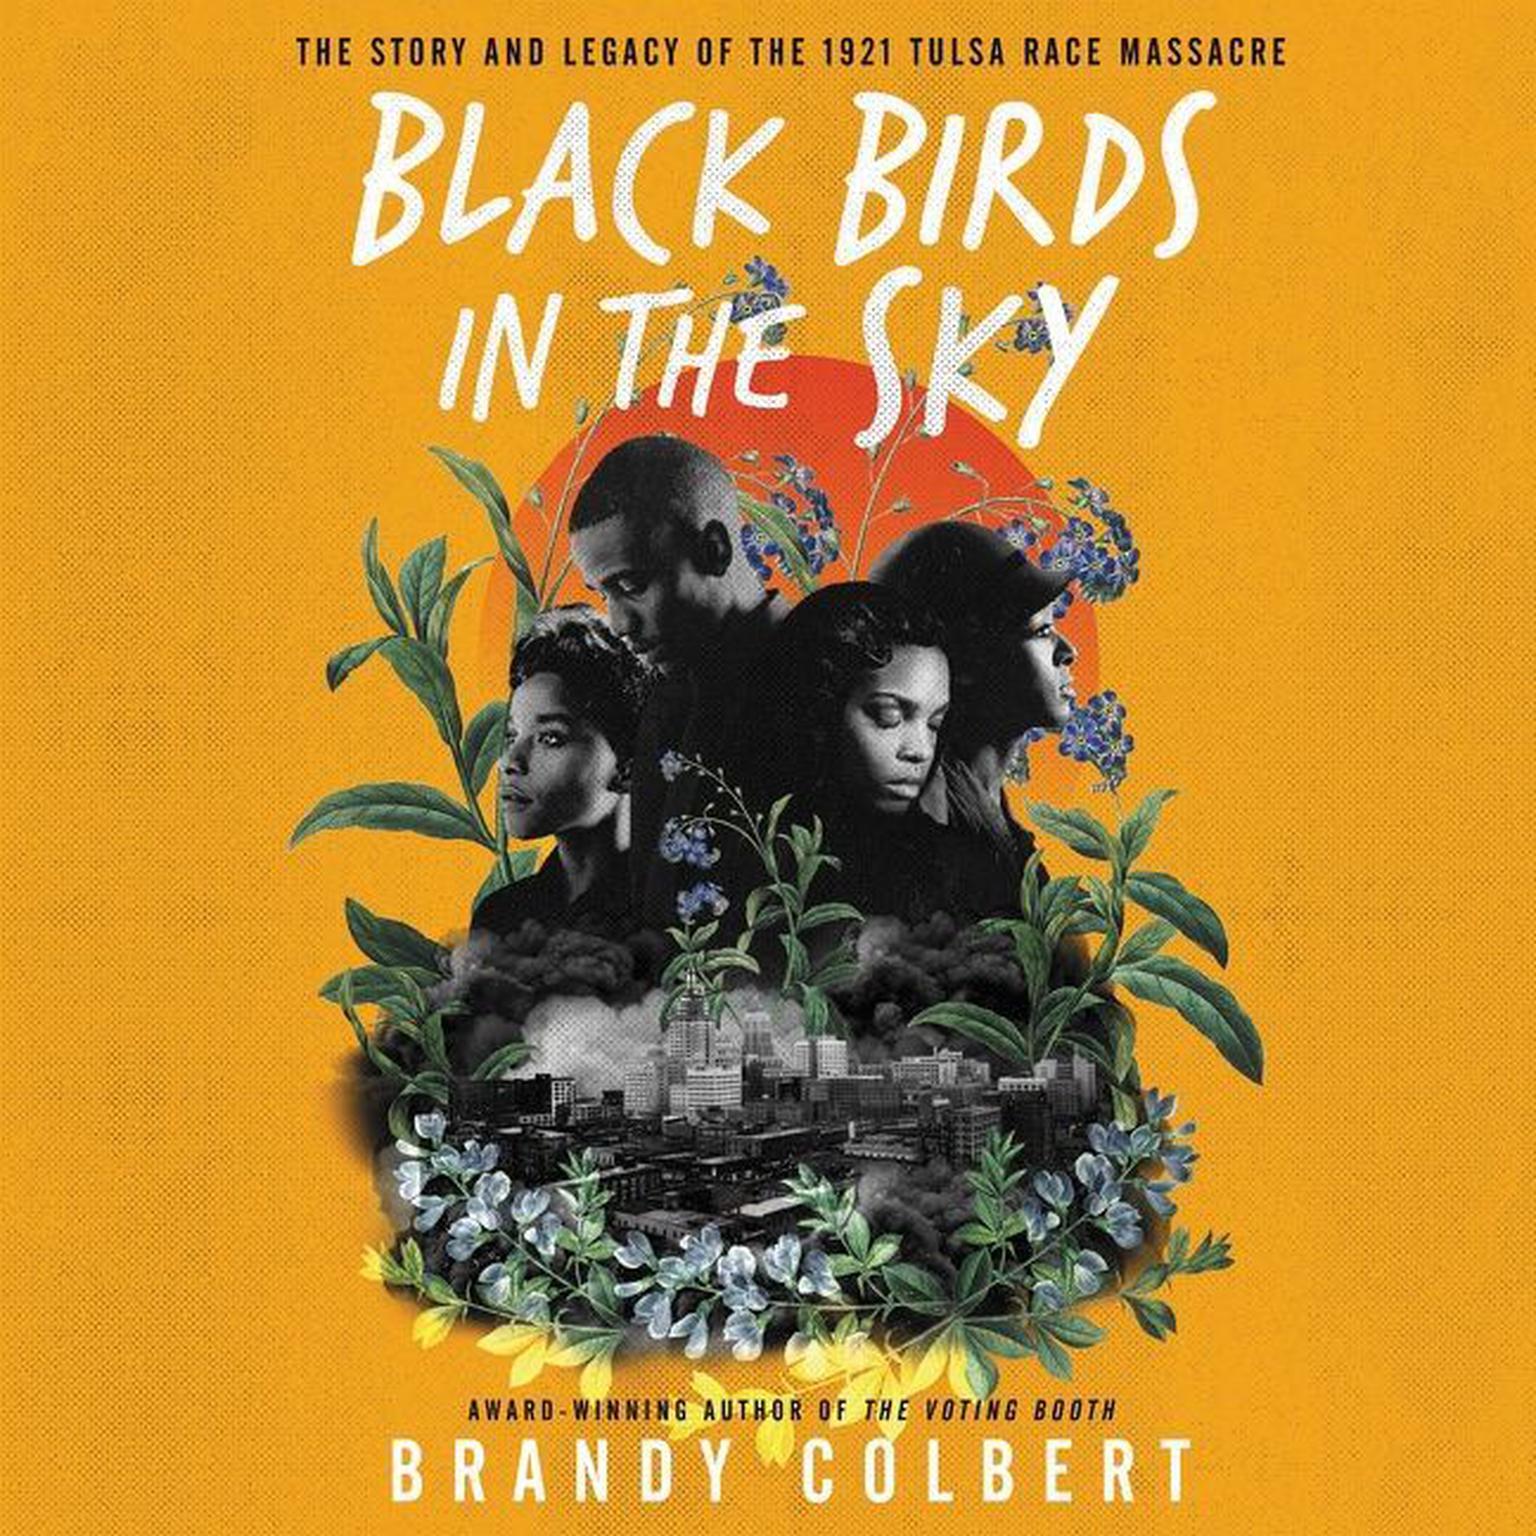 Black Birds in the Sky: The Story and Legacy of the 1921 Tulsa Race Massacre Audiobook, by Brandy Colbert